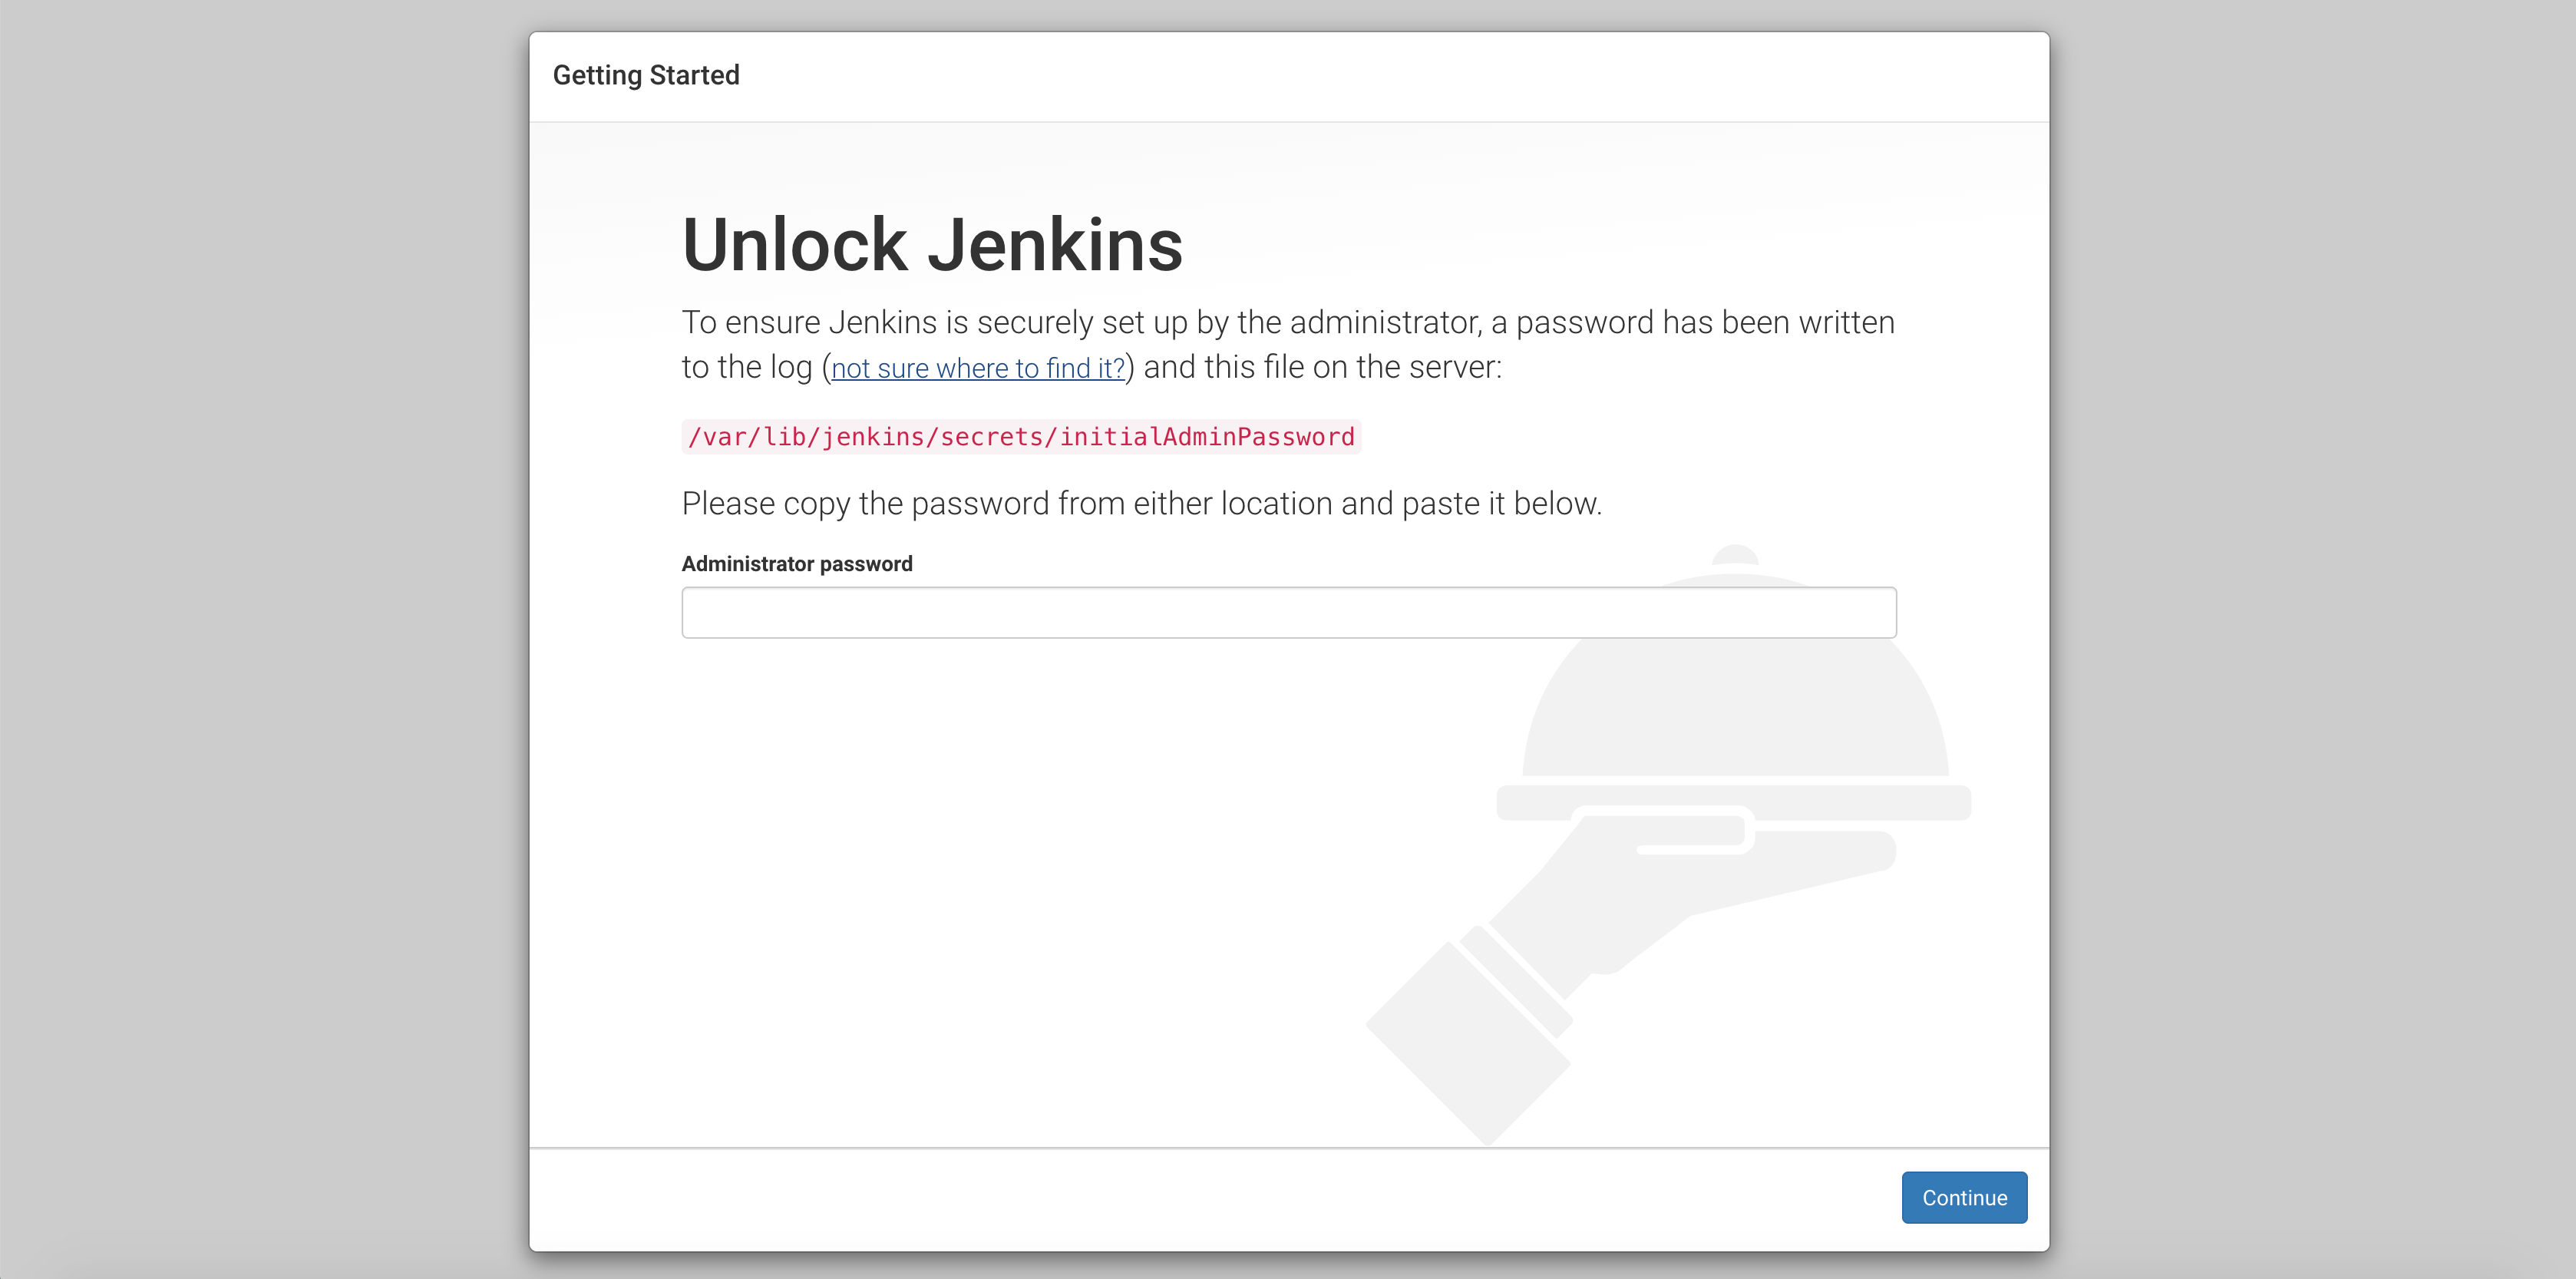 Log into Jenkins with your admin password